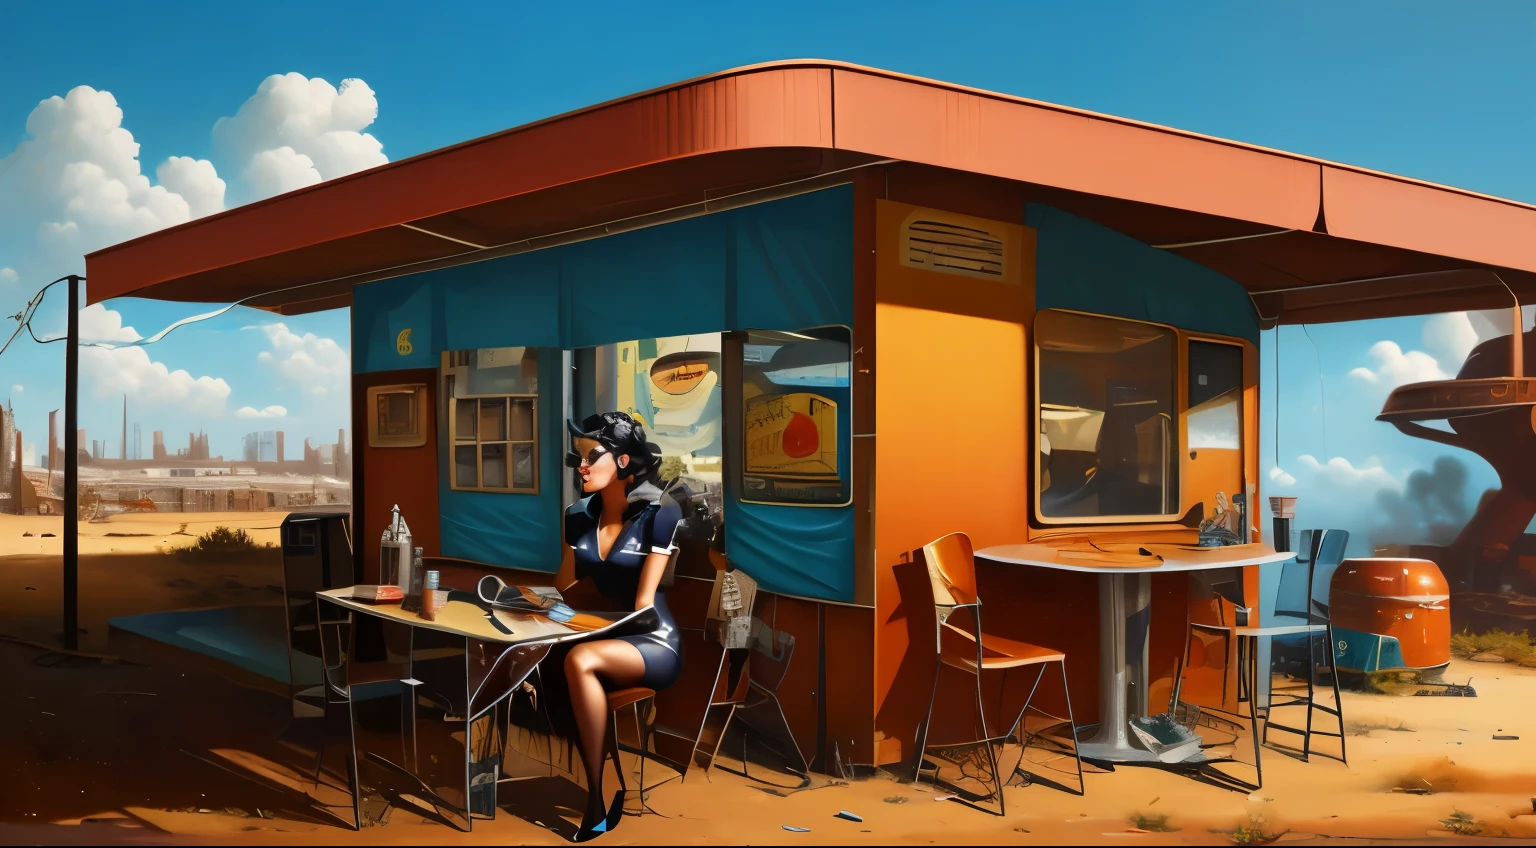 High art oil painting in pinup style, A shabby battered rusty anthropomorphic robot (retrofuturism) smokes cigarette under an awning